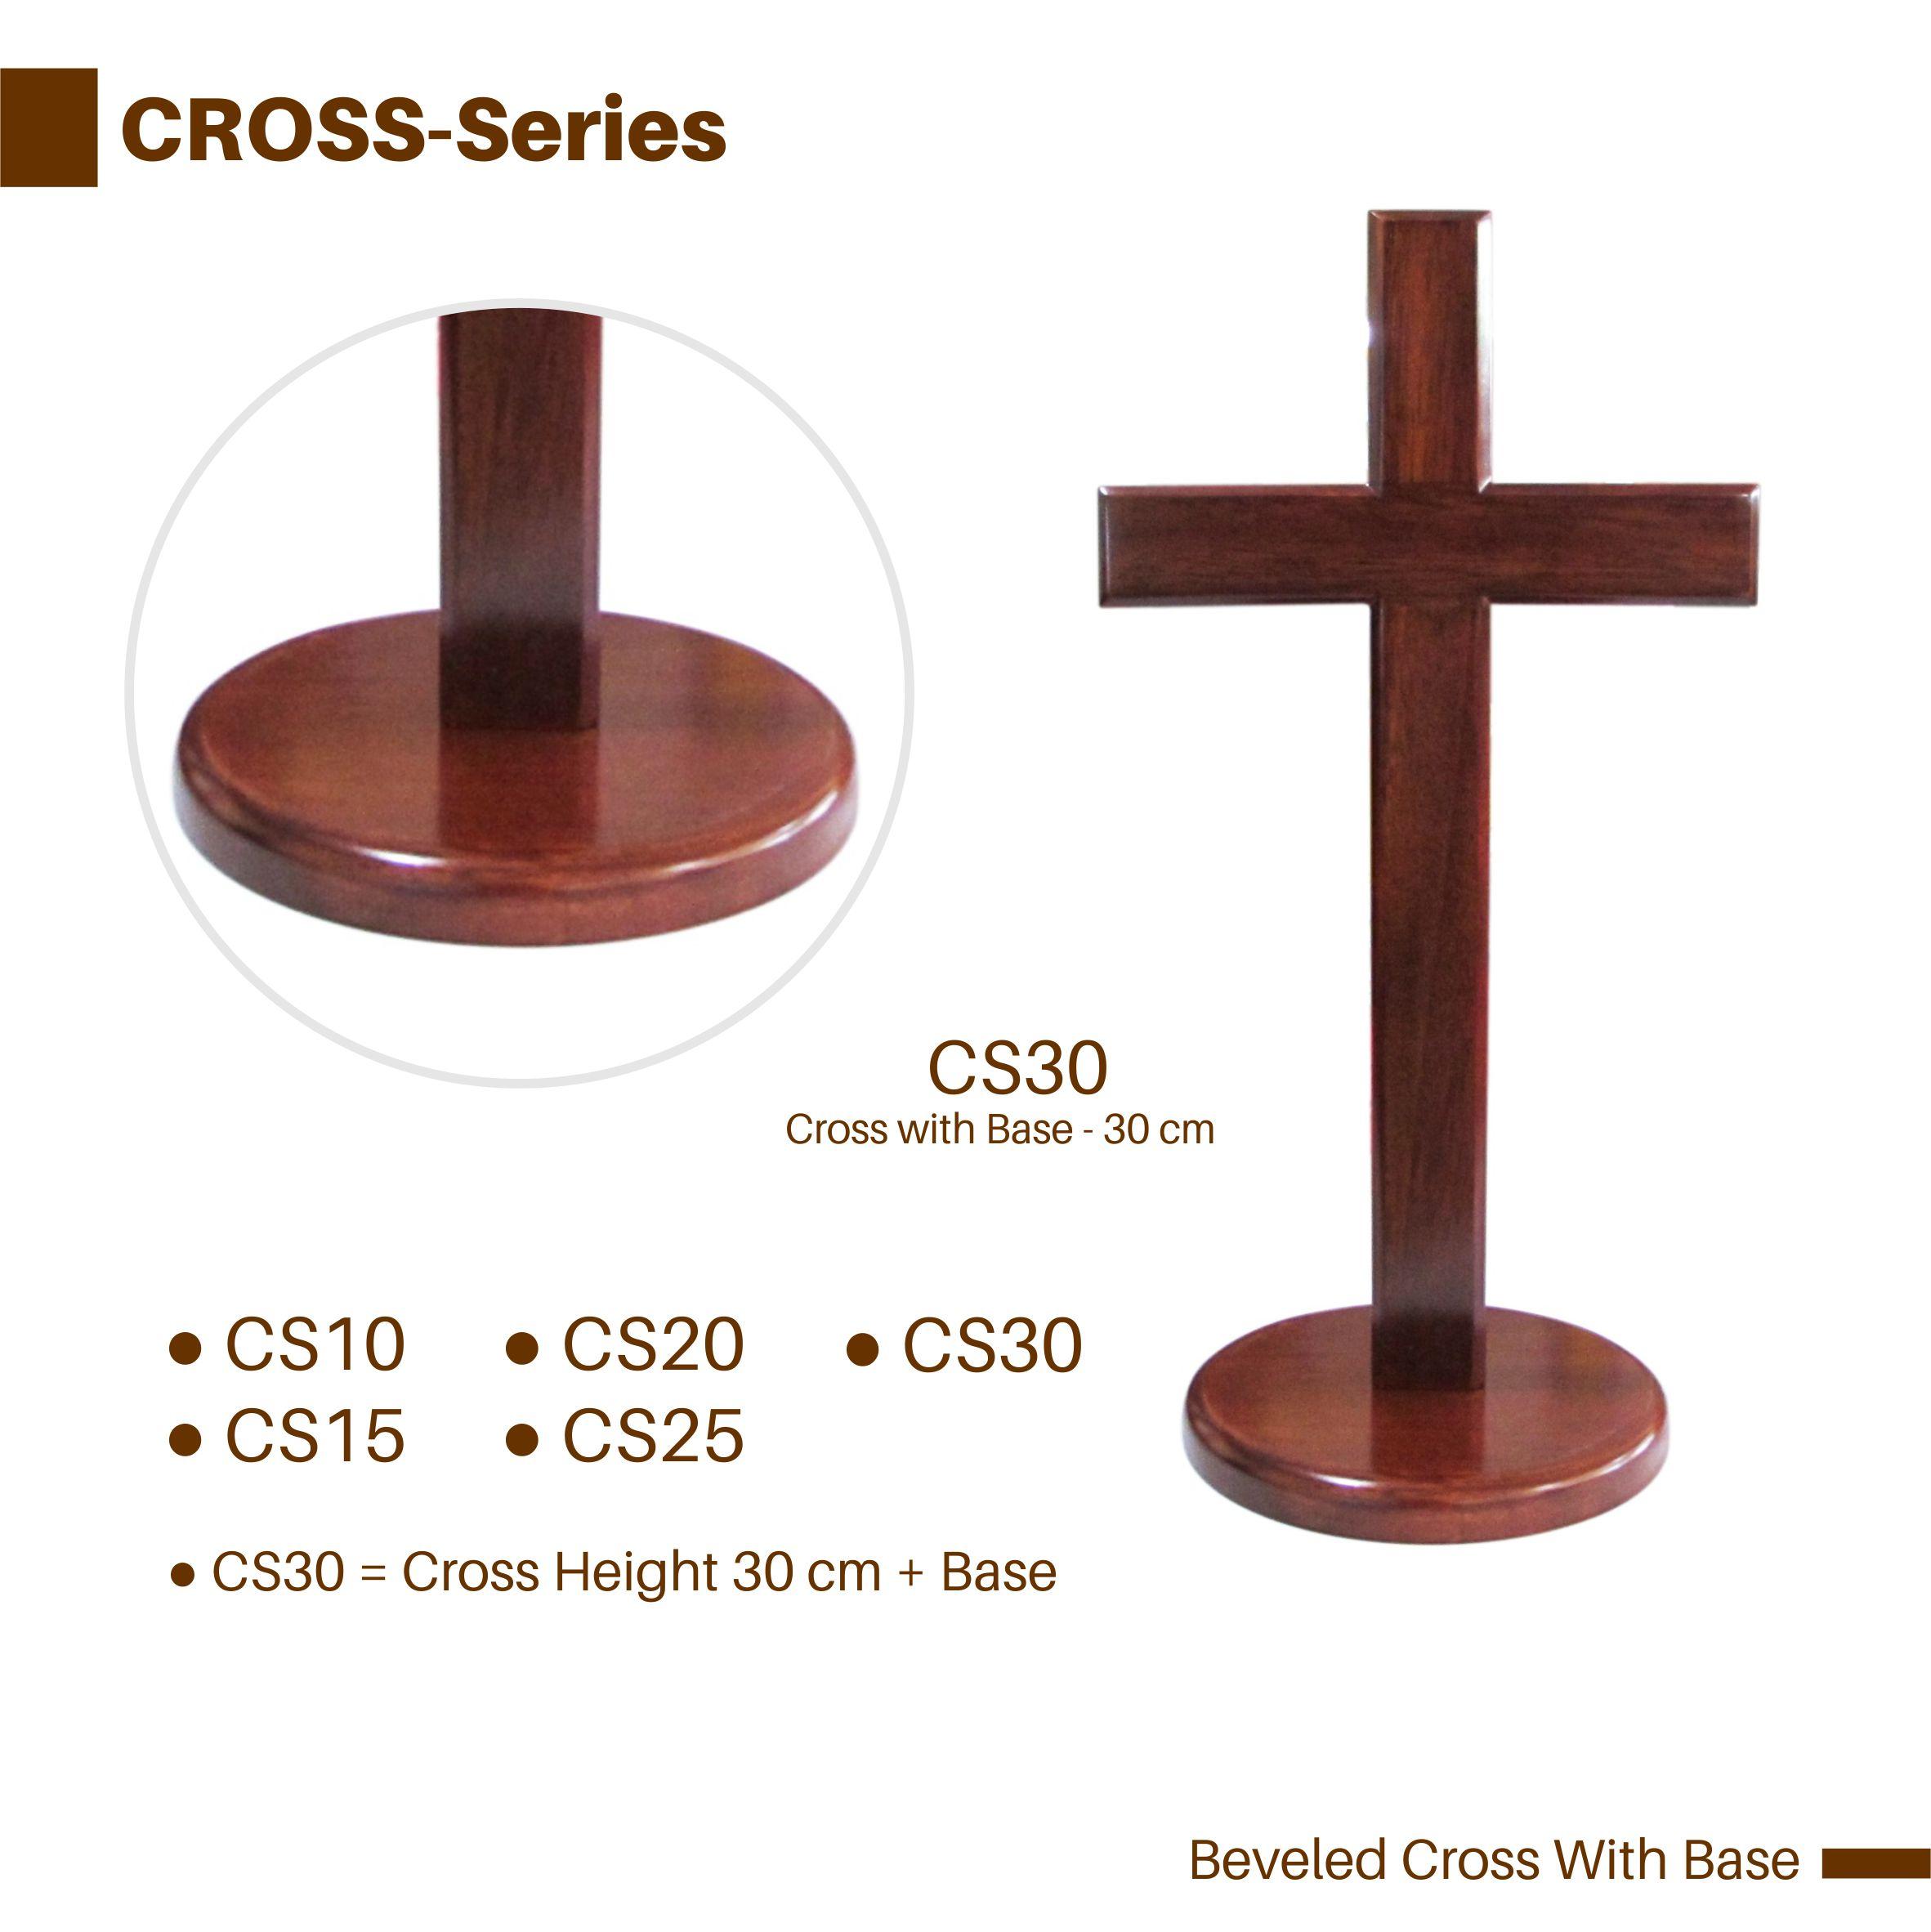 Cross with base